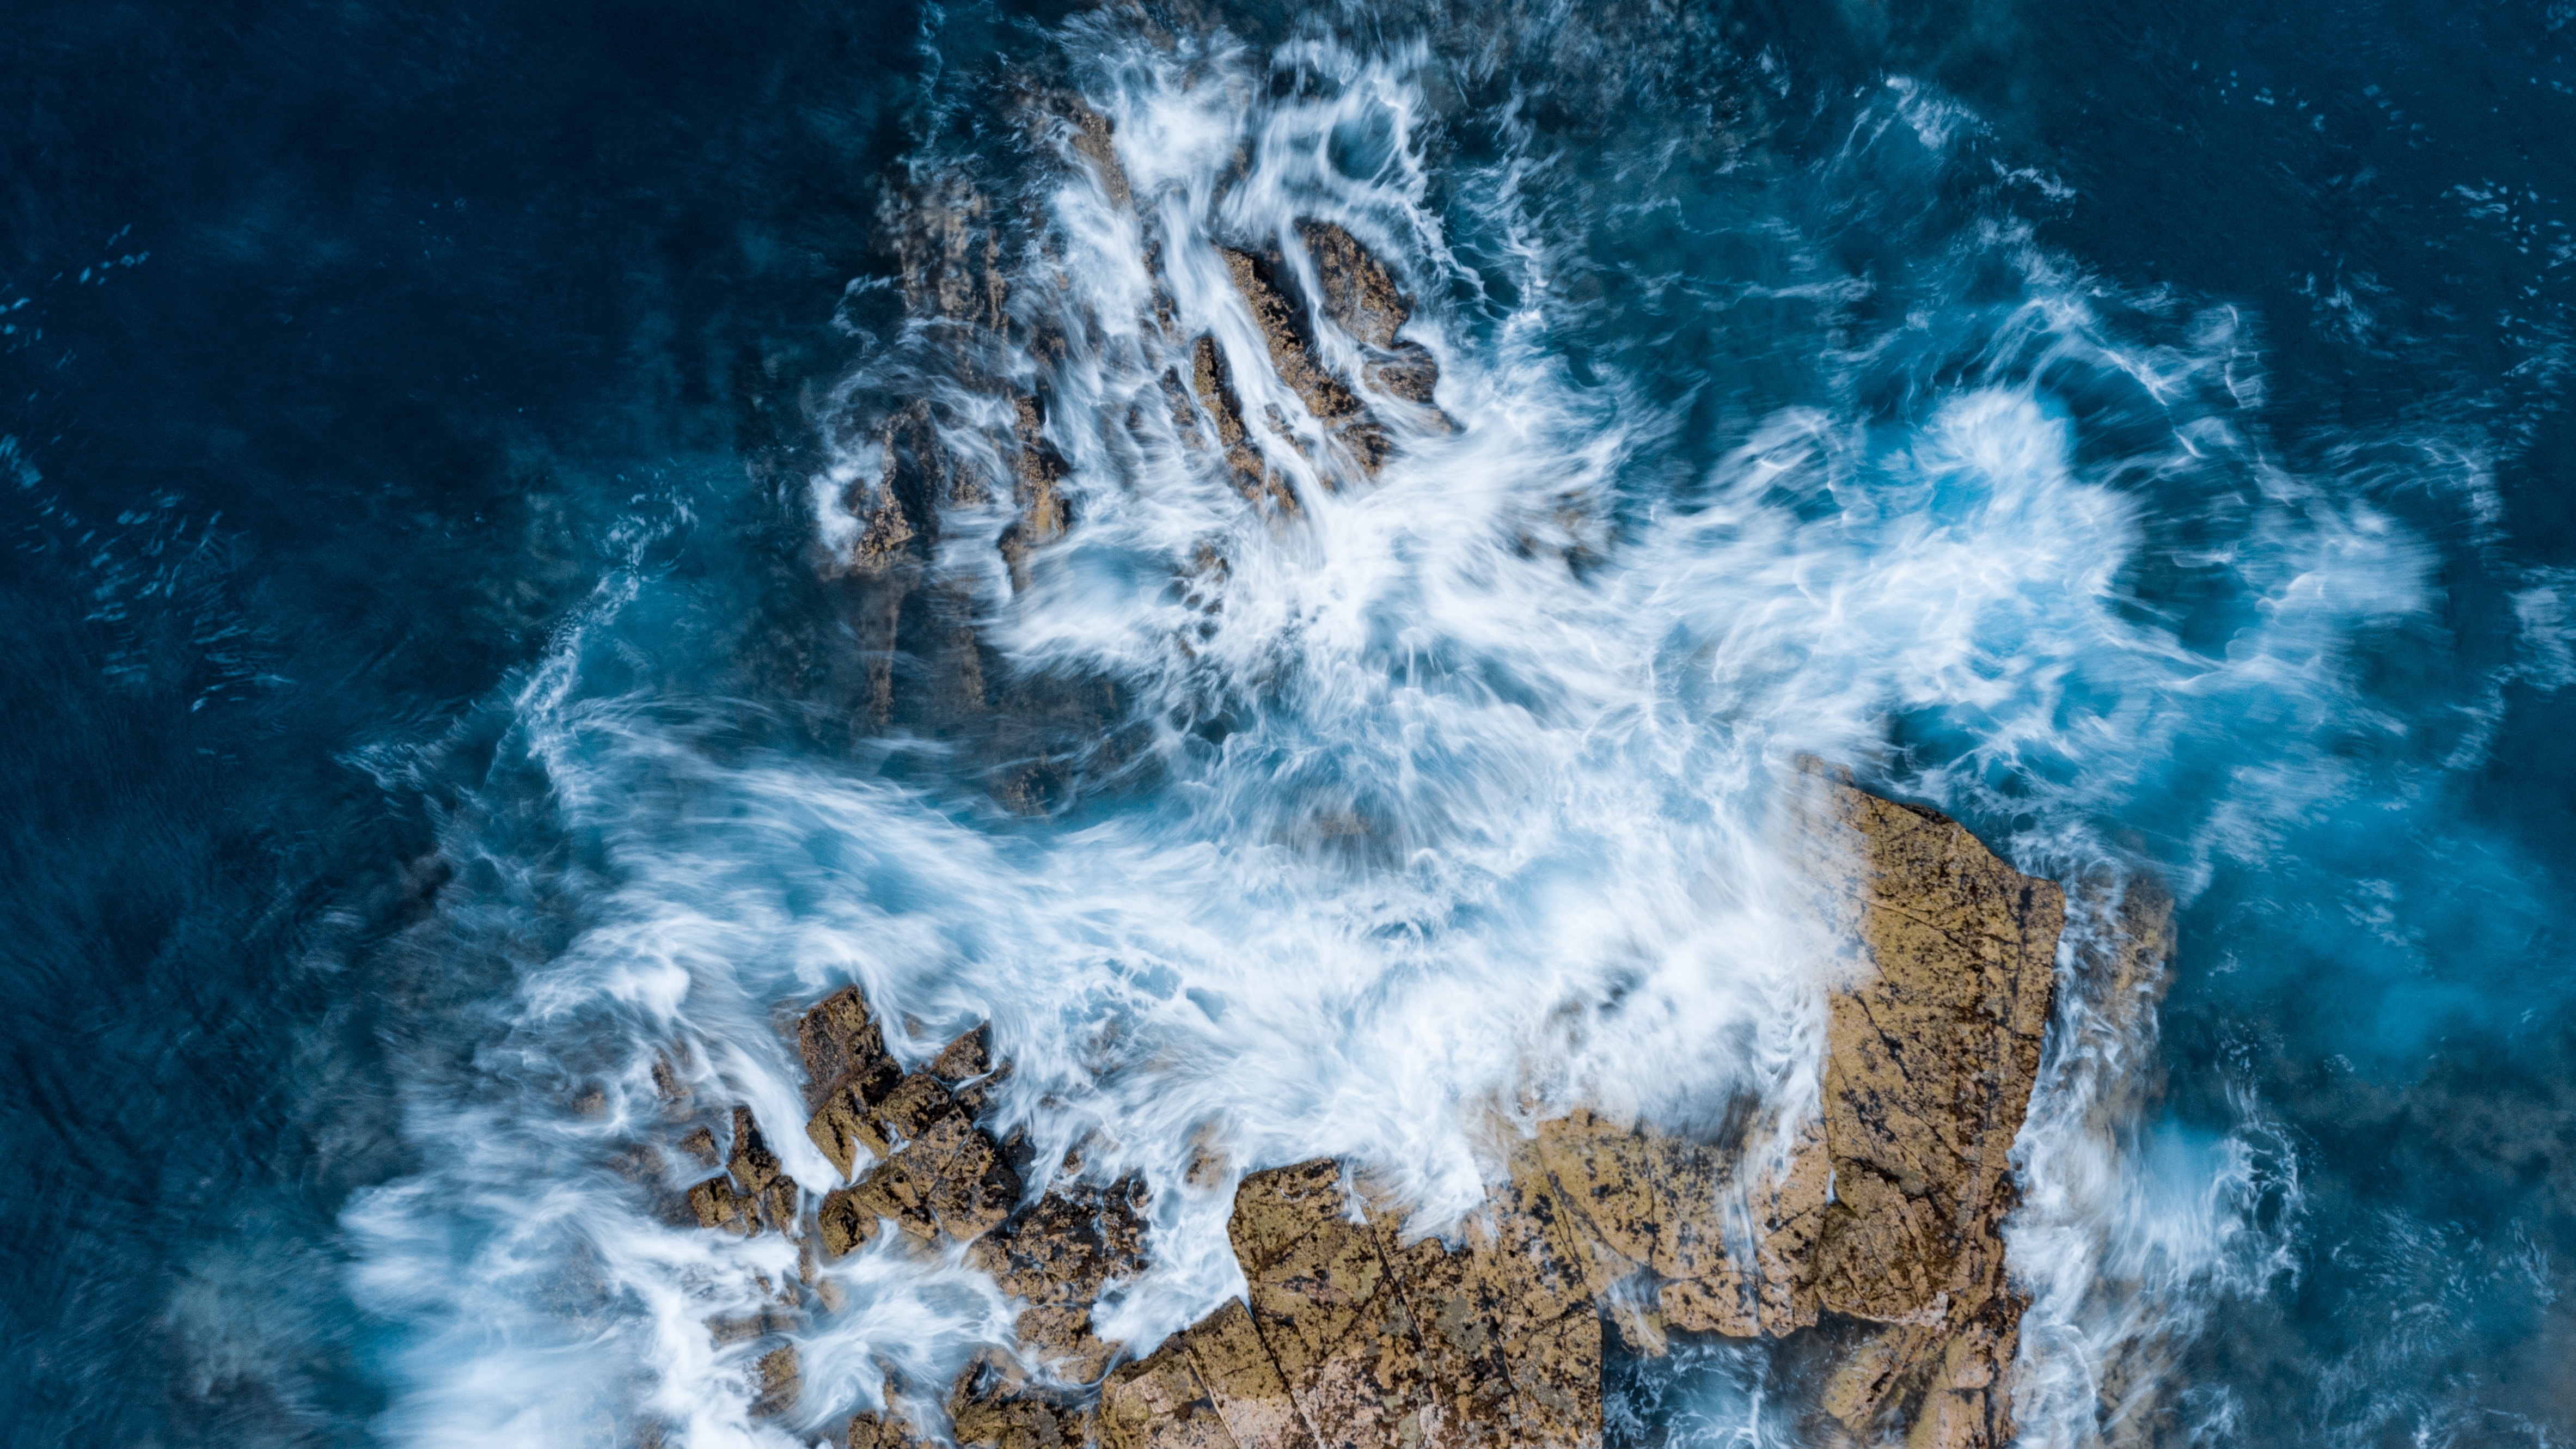 nature, water, waves, sea, rocks, view from above Desktop home screen Wallpaper